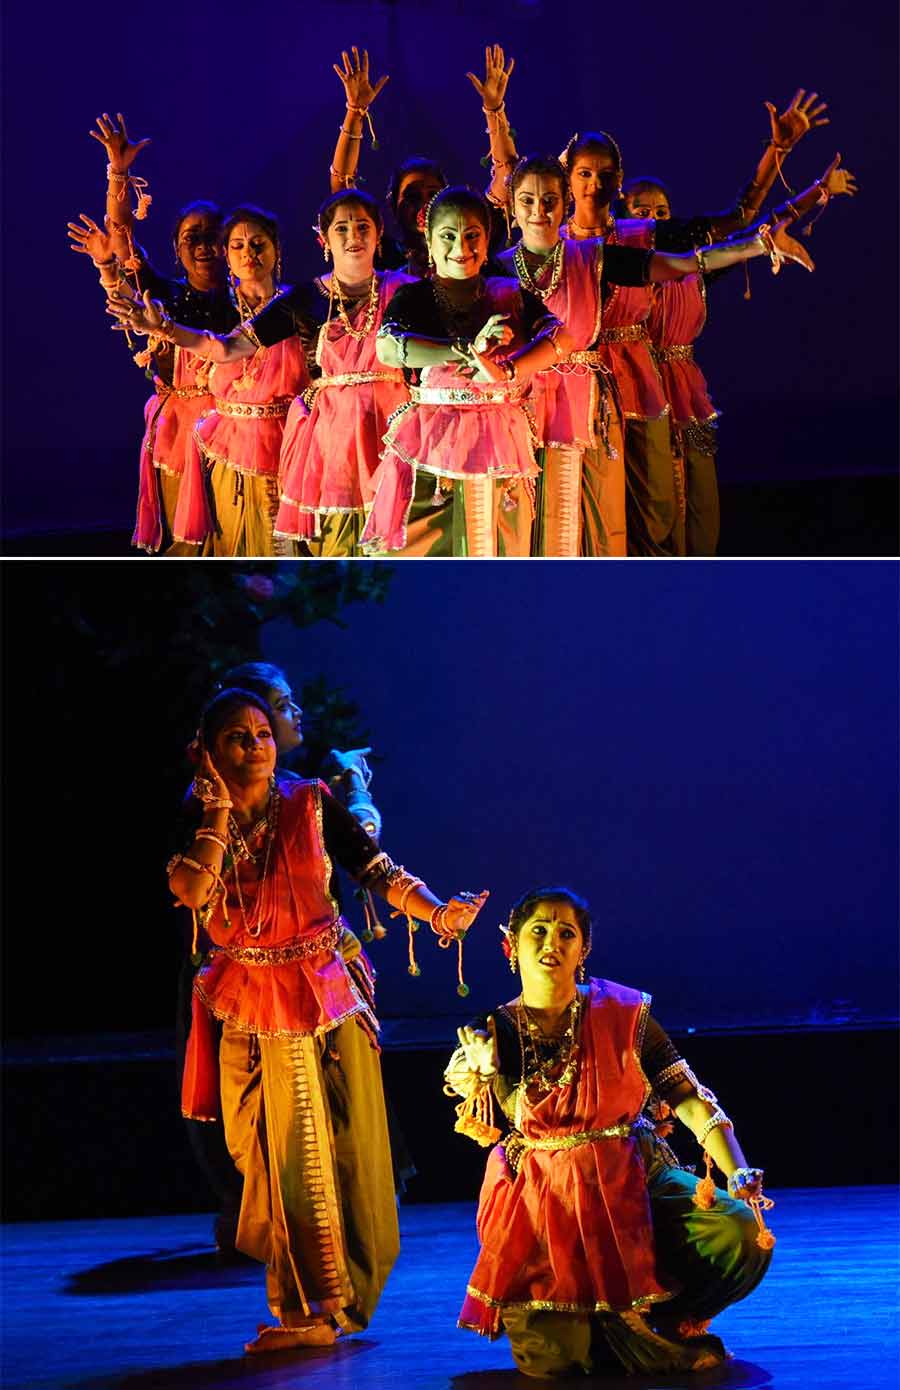 Indian Council for Cultural Relations Zonal Office (East) and Rabindranath Tagore Centre, Kolkata, West Bengal organised a Manipuri Dance recital "NONGI ITHIN" (Dasavatar & other composition with Lecture-Demonstration) by Vidushi Poushali Chatterjee and group on Friday at the Satyajit Ray Auditorium, ICCR  